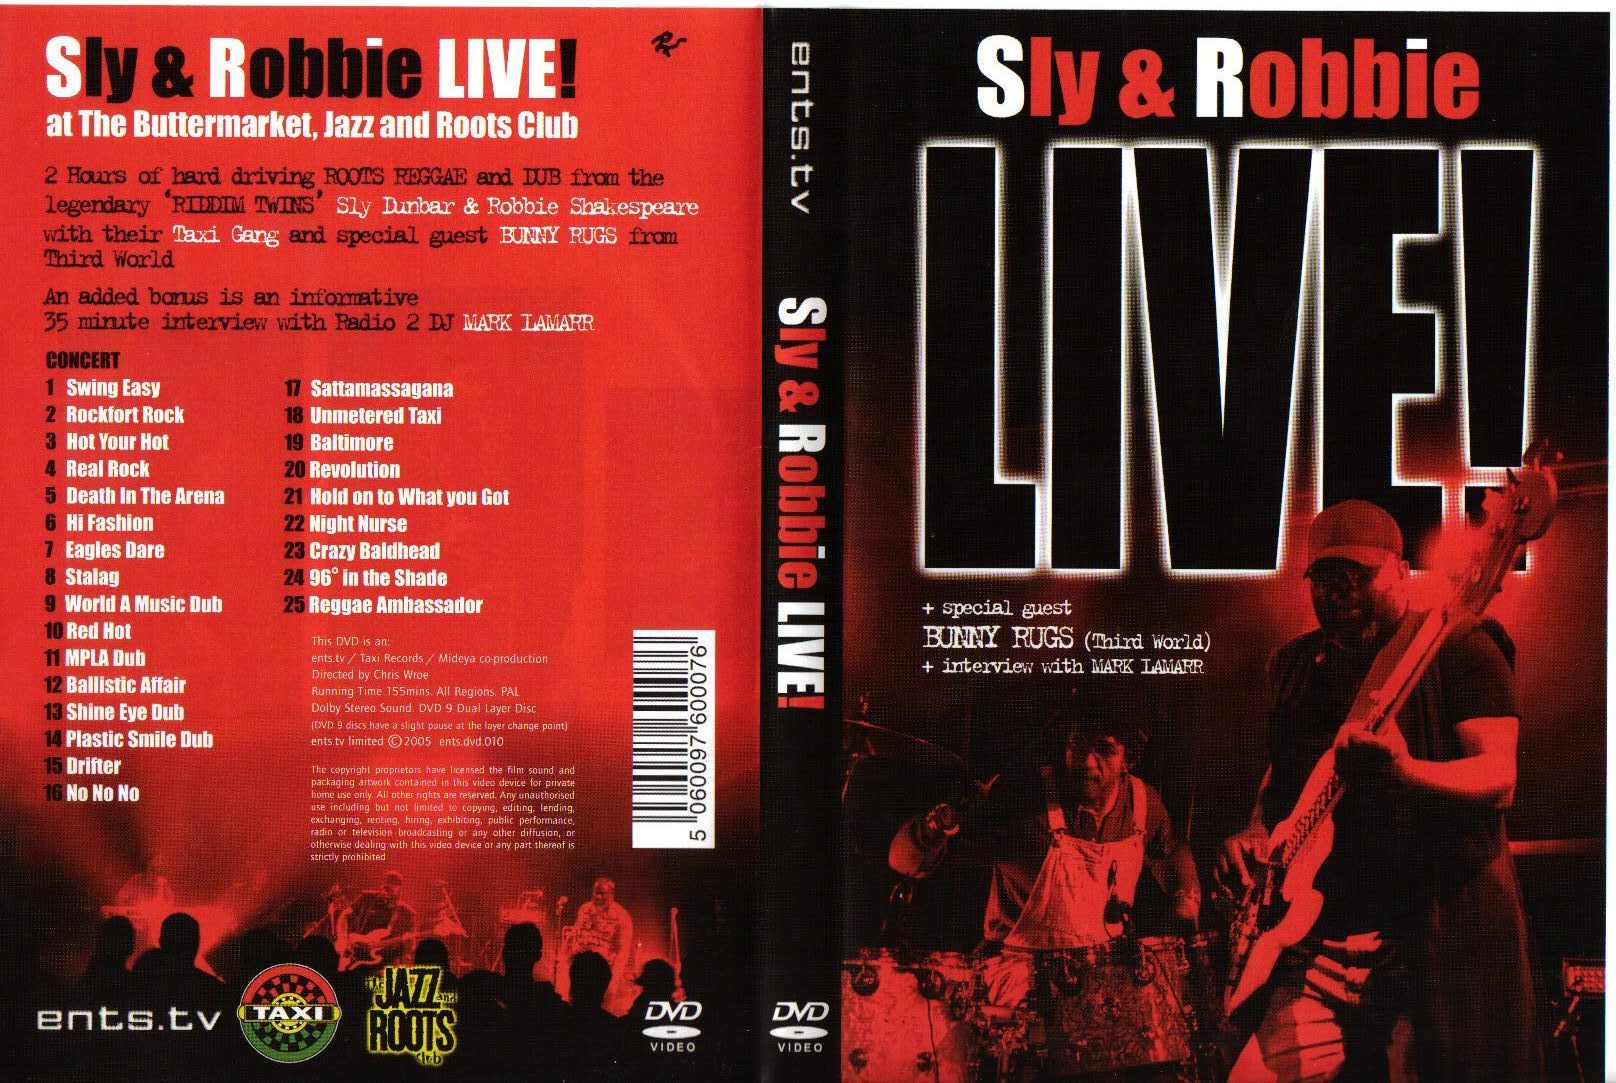 Jaquette DVD Sly and Robbie live